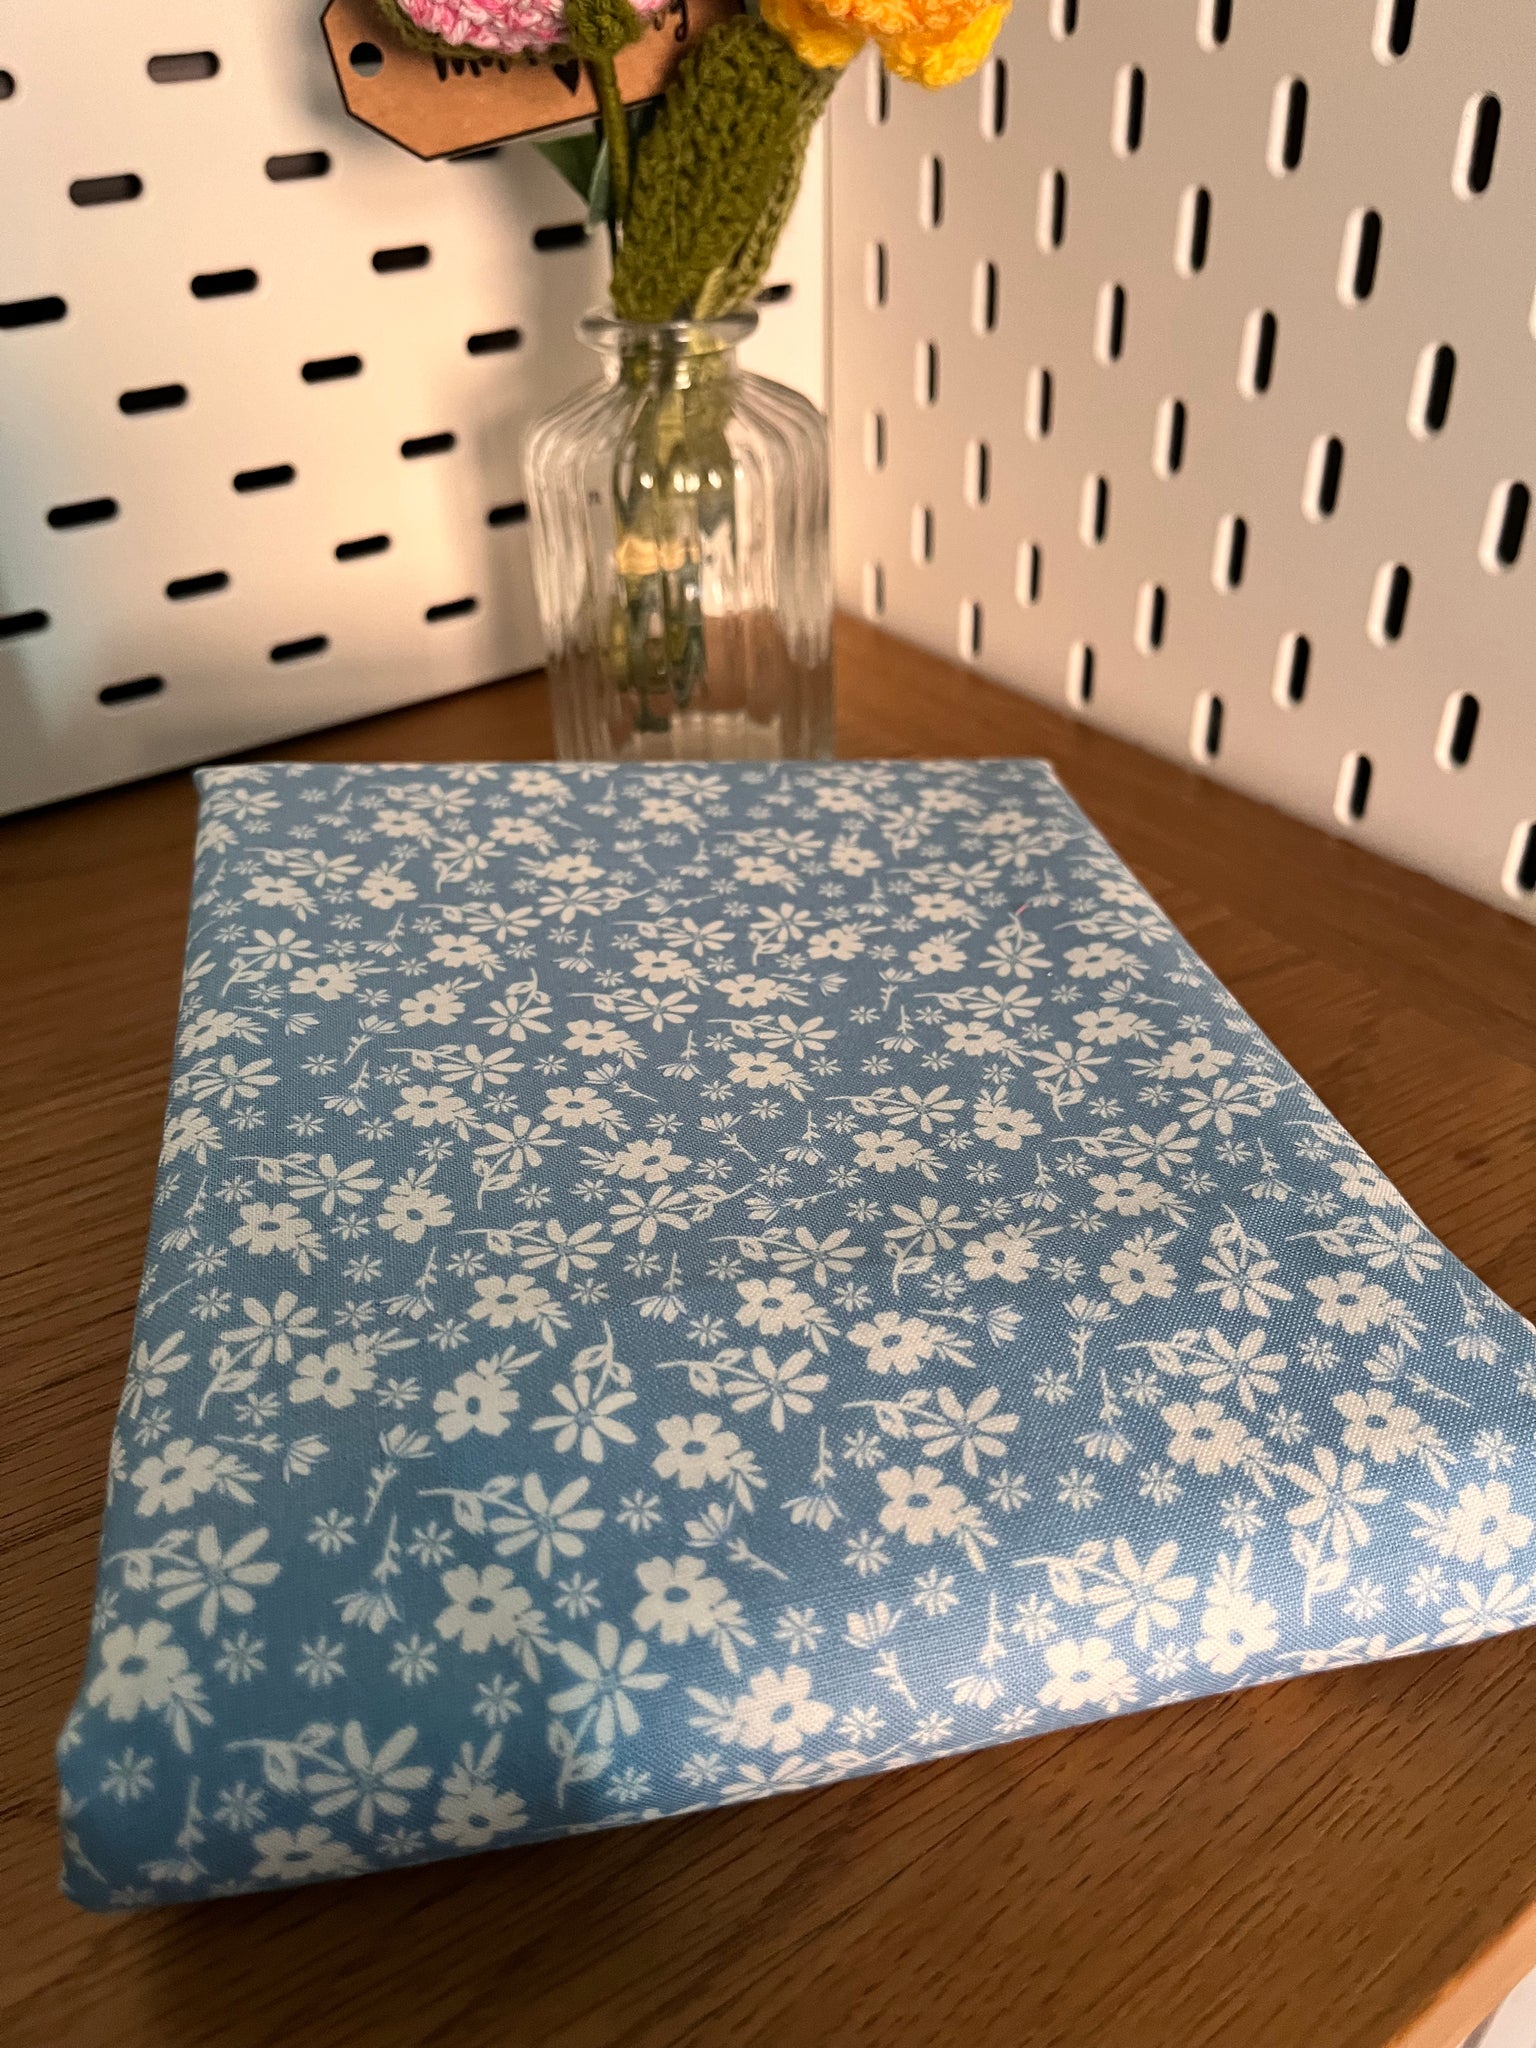 Sale Fabric 9: Sky Blue Floral Fabric Remnant 56" x 45"